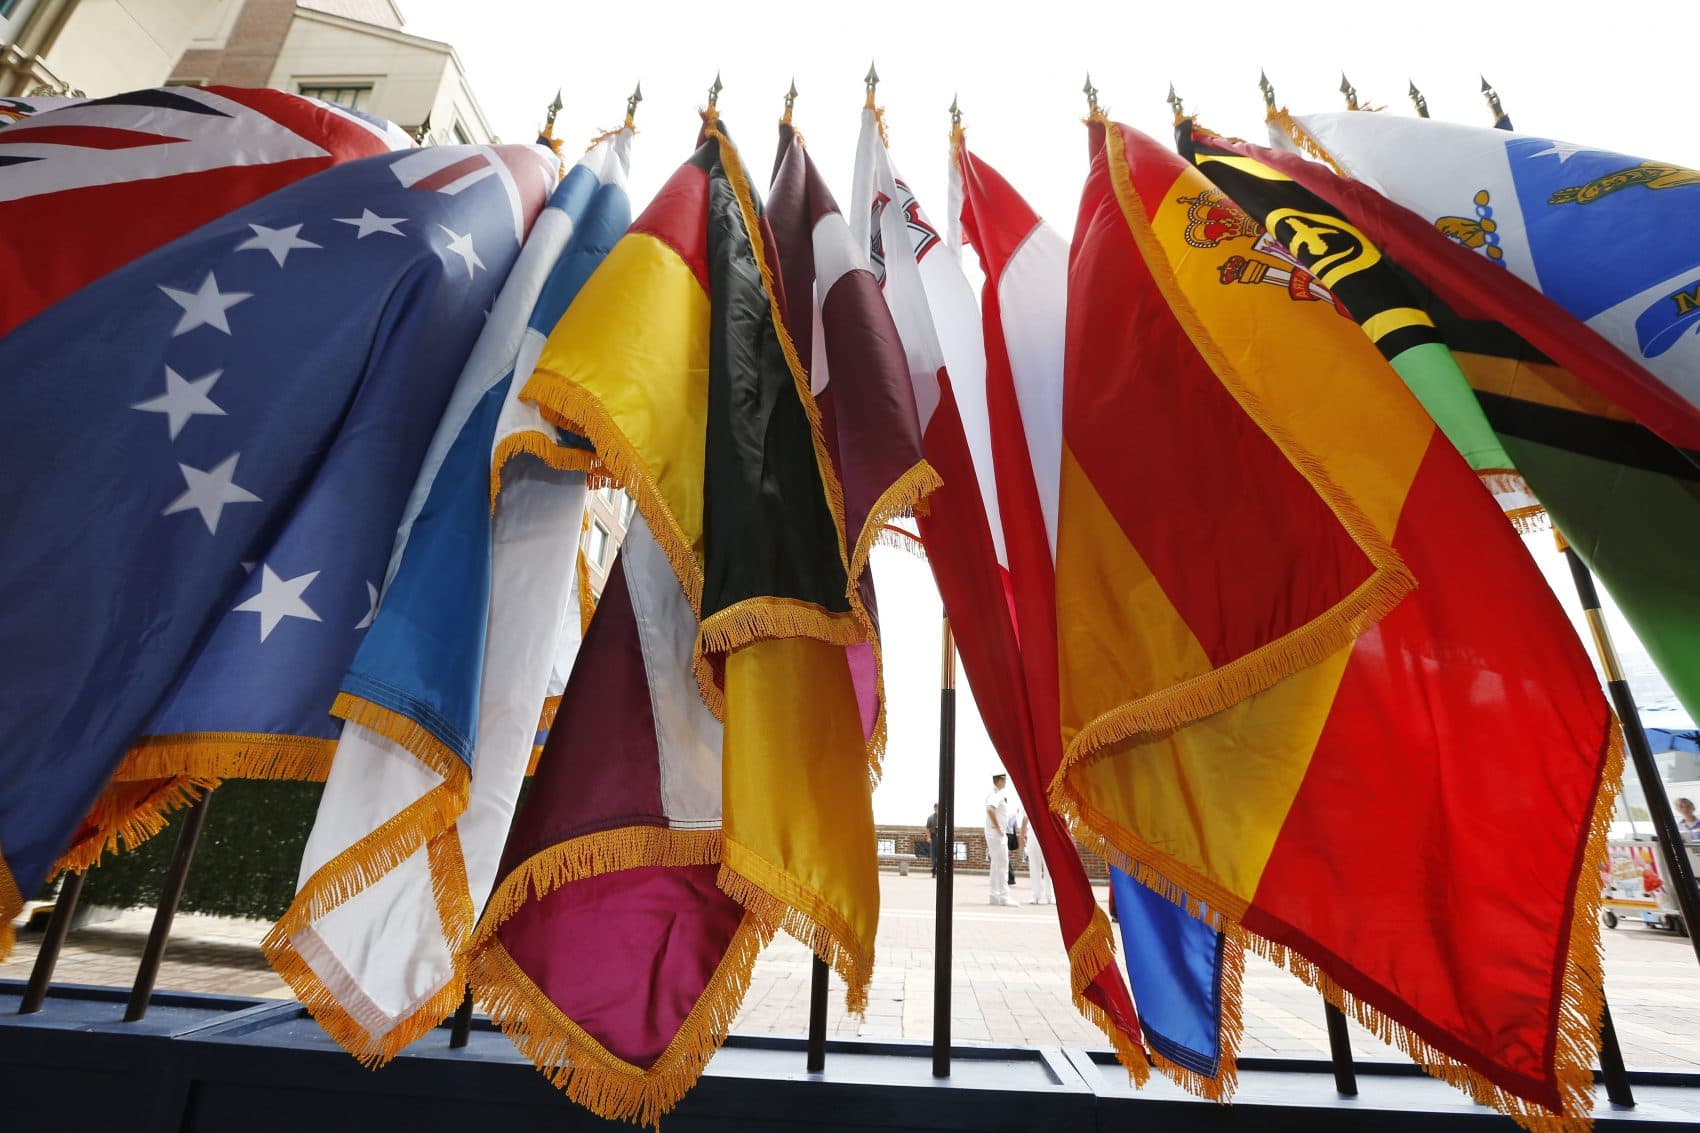 Flags for a backdrop during opening ceremonies for the Sail Boston tall ships event on Friday in Boston. (Michael Dwyer/AP)